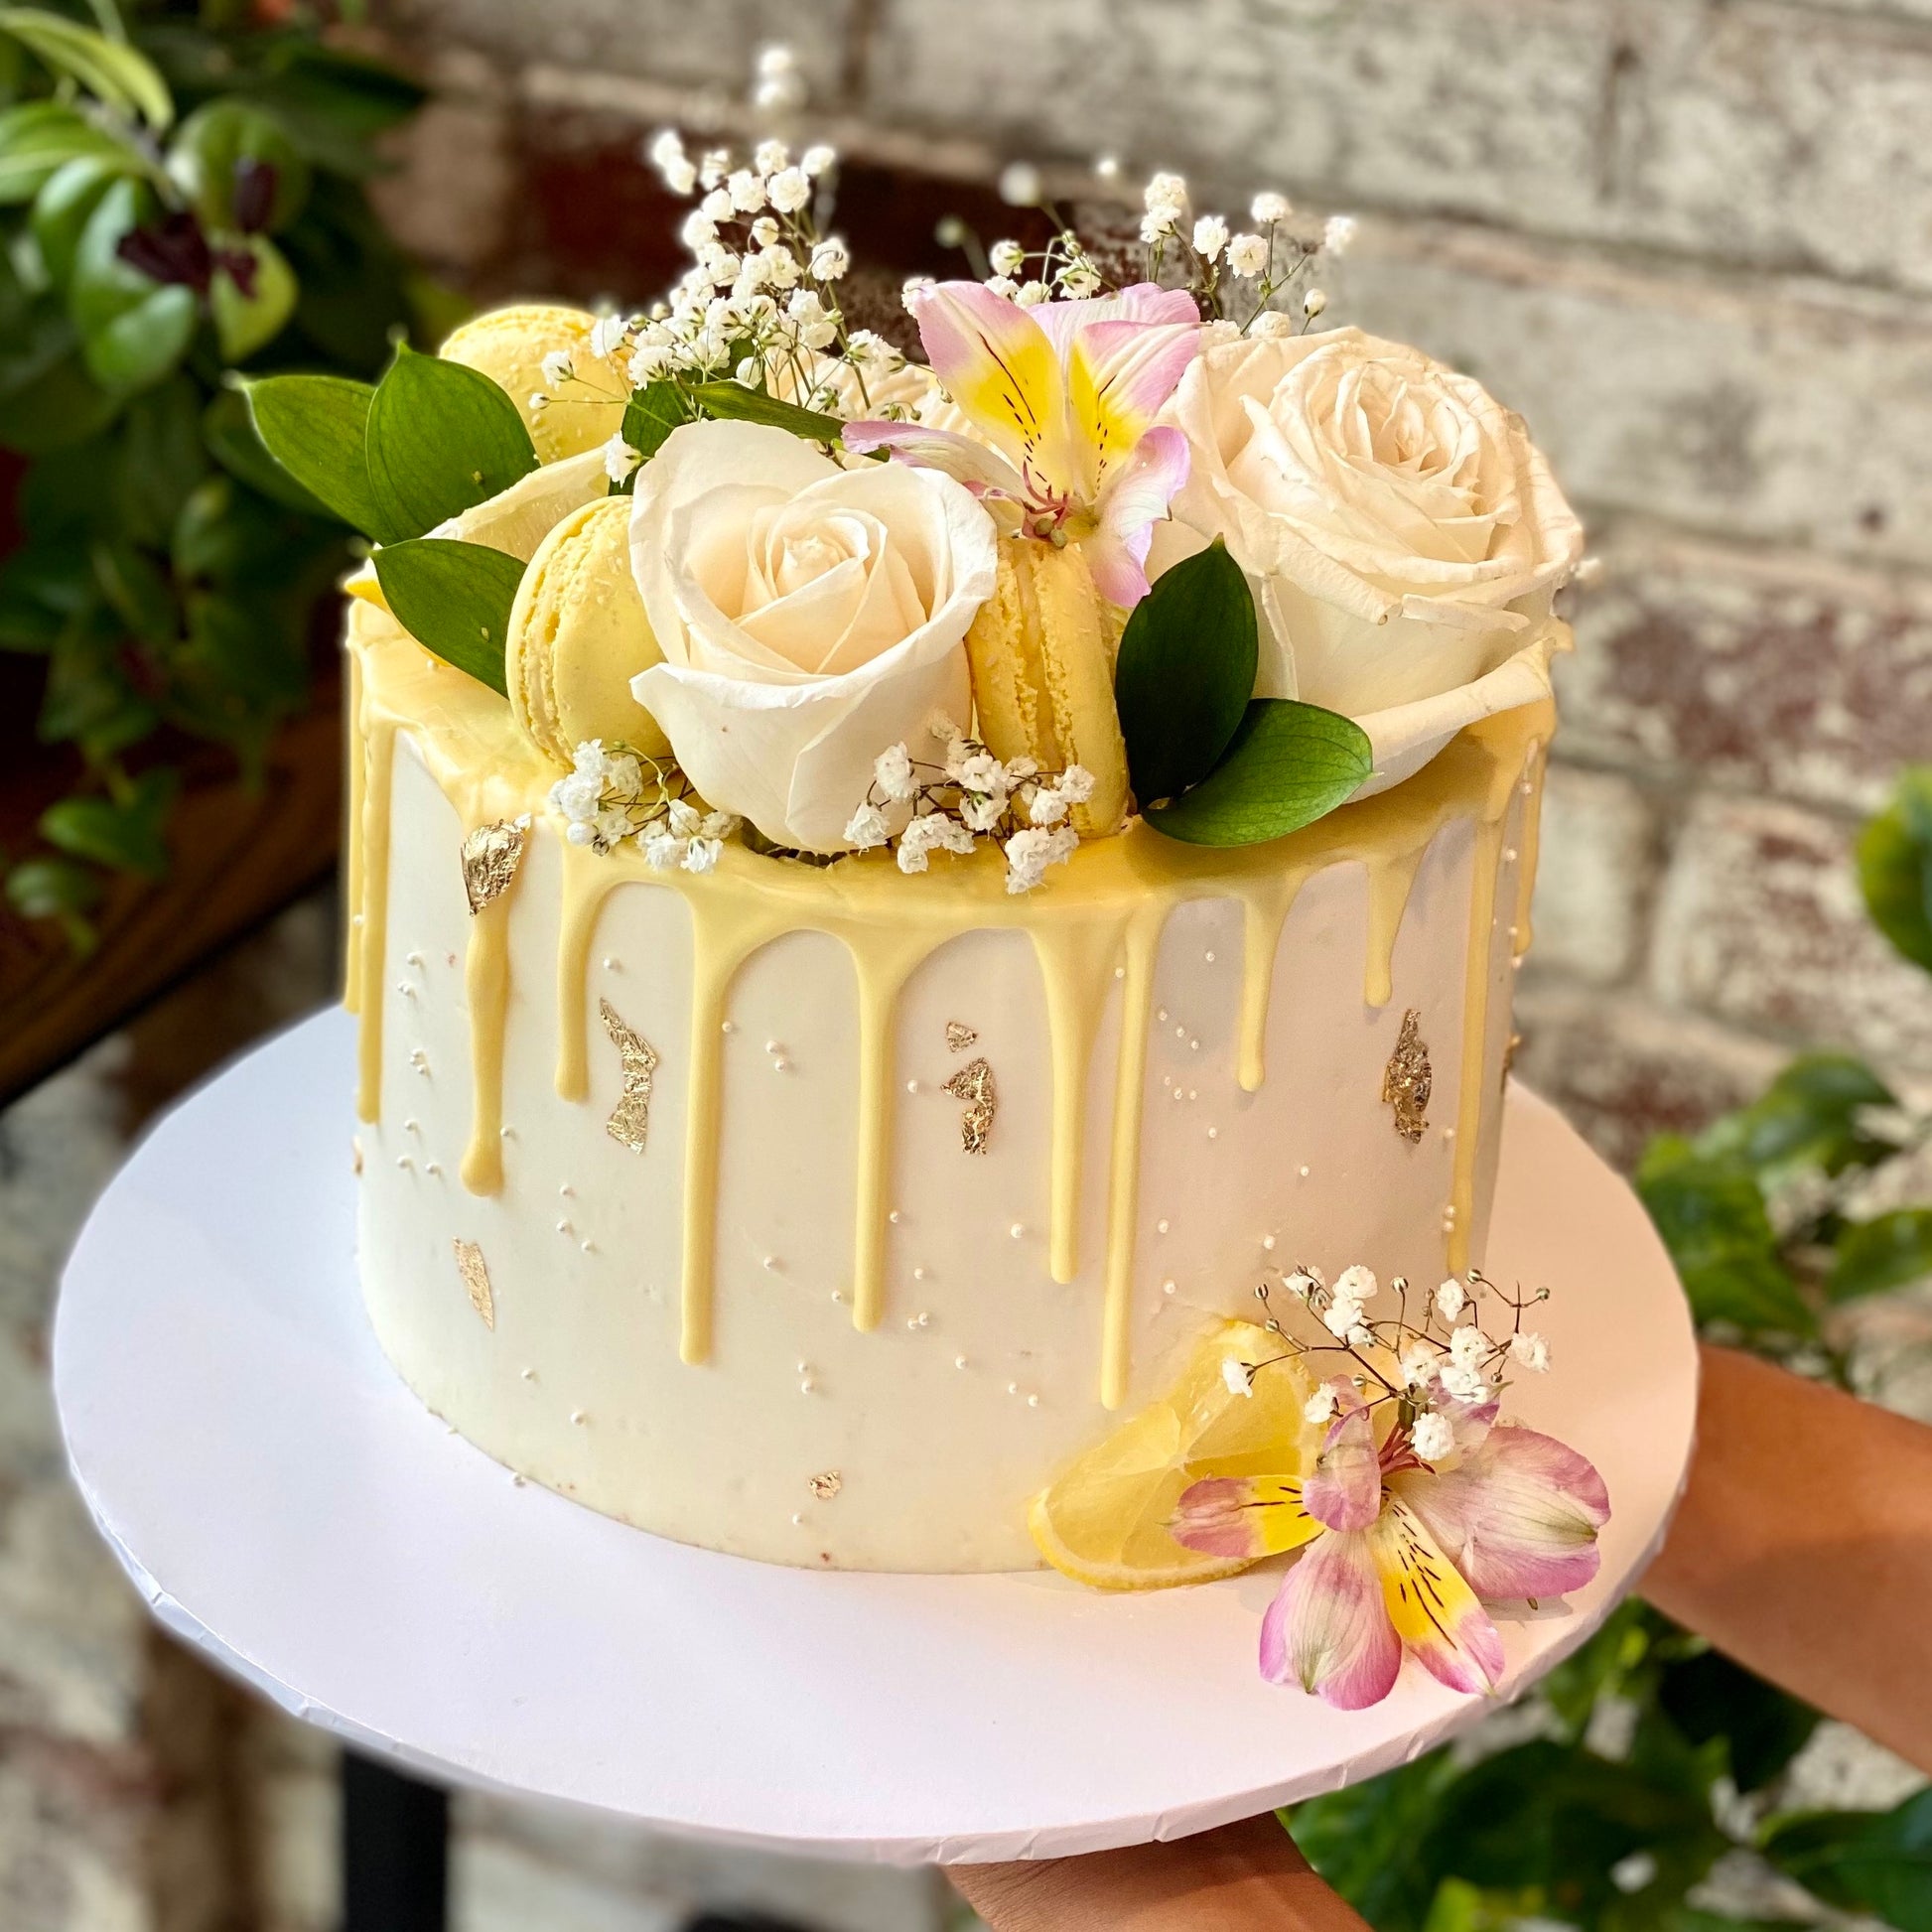 Wedding cake with golden colour and fresh flowers on top